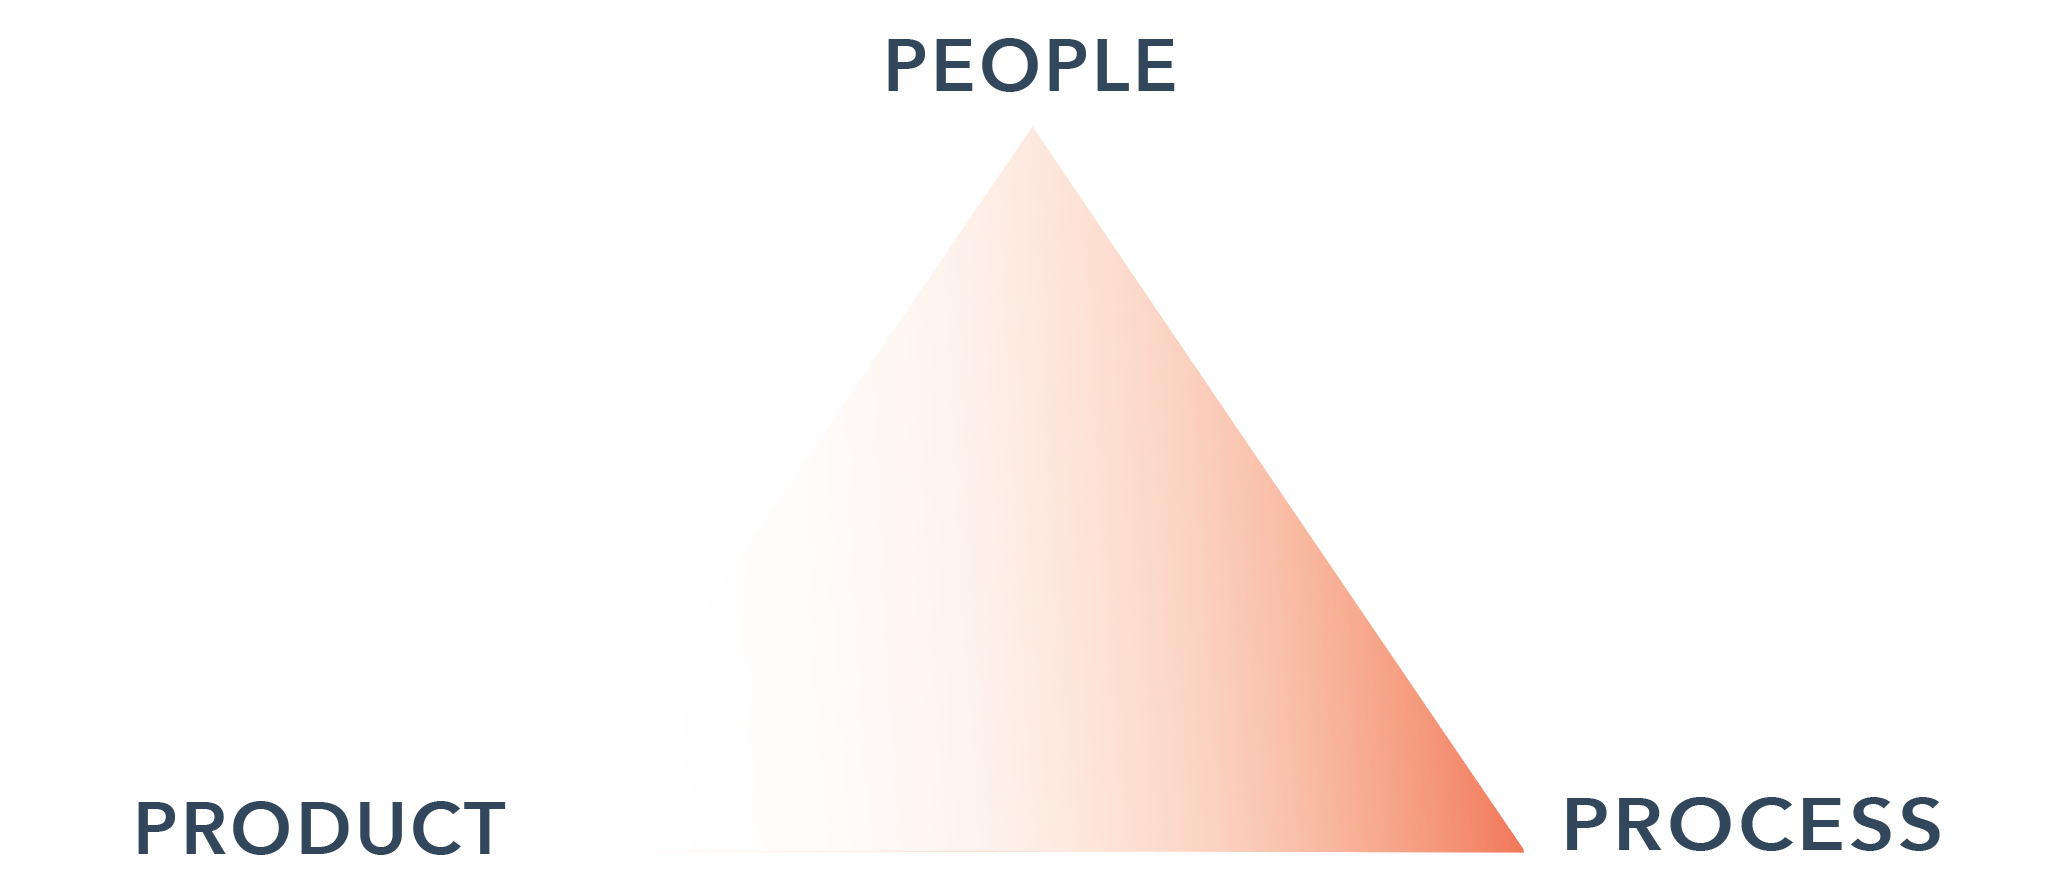 Another triangle. We love the triangles in this post! The same labeling as the first image, except this time, the triangle is shaded inside, and the shading amplifies the connection between "people" at the top point and "process" at the bottom right point.